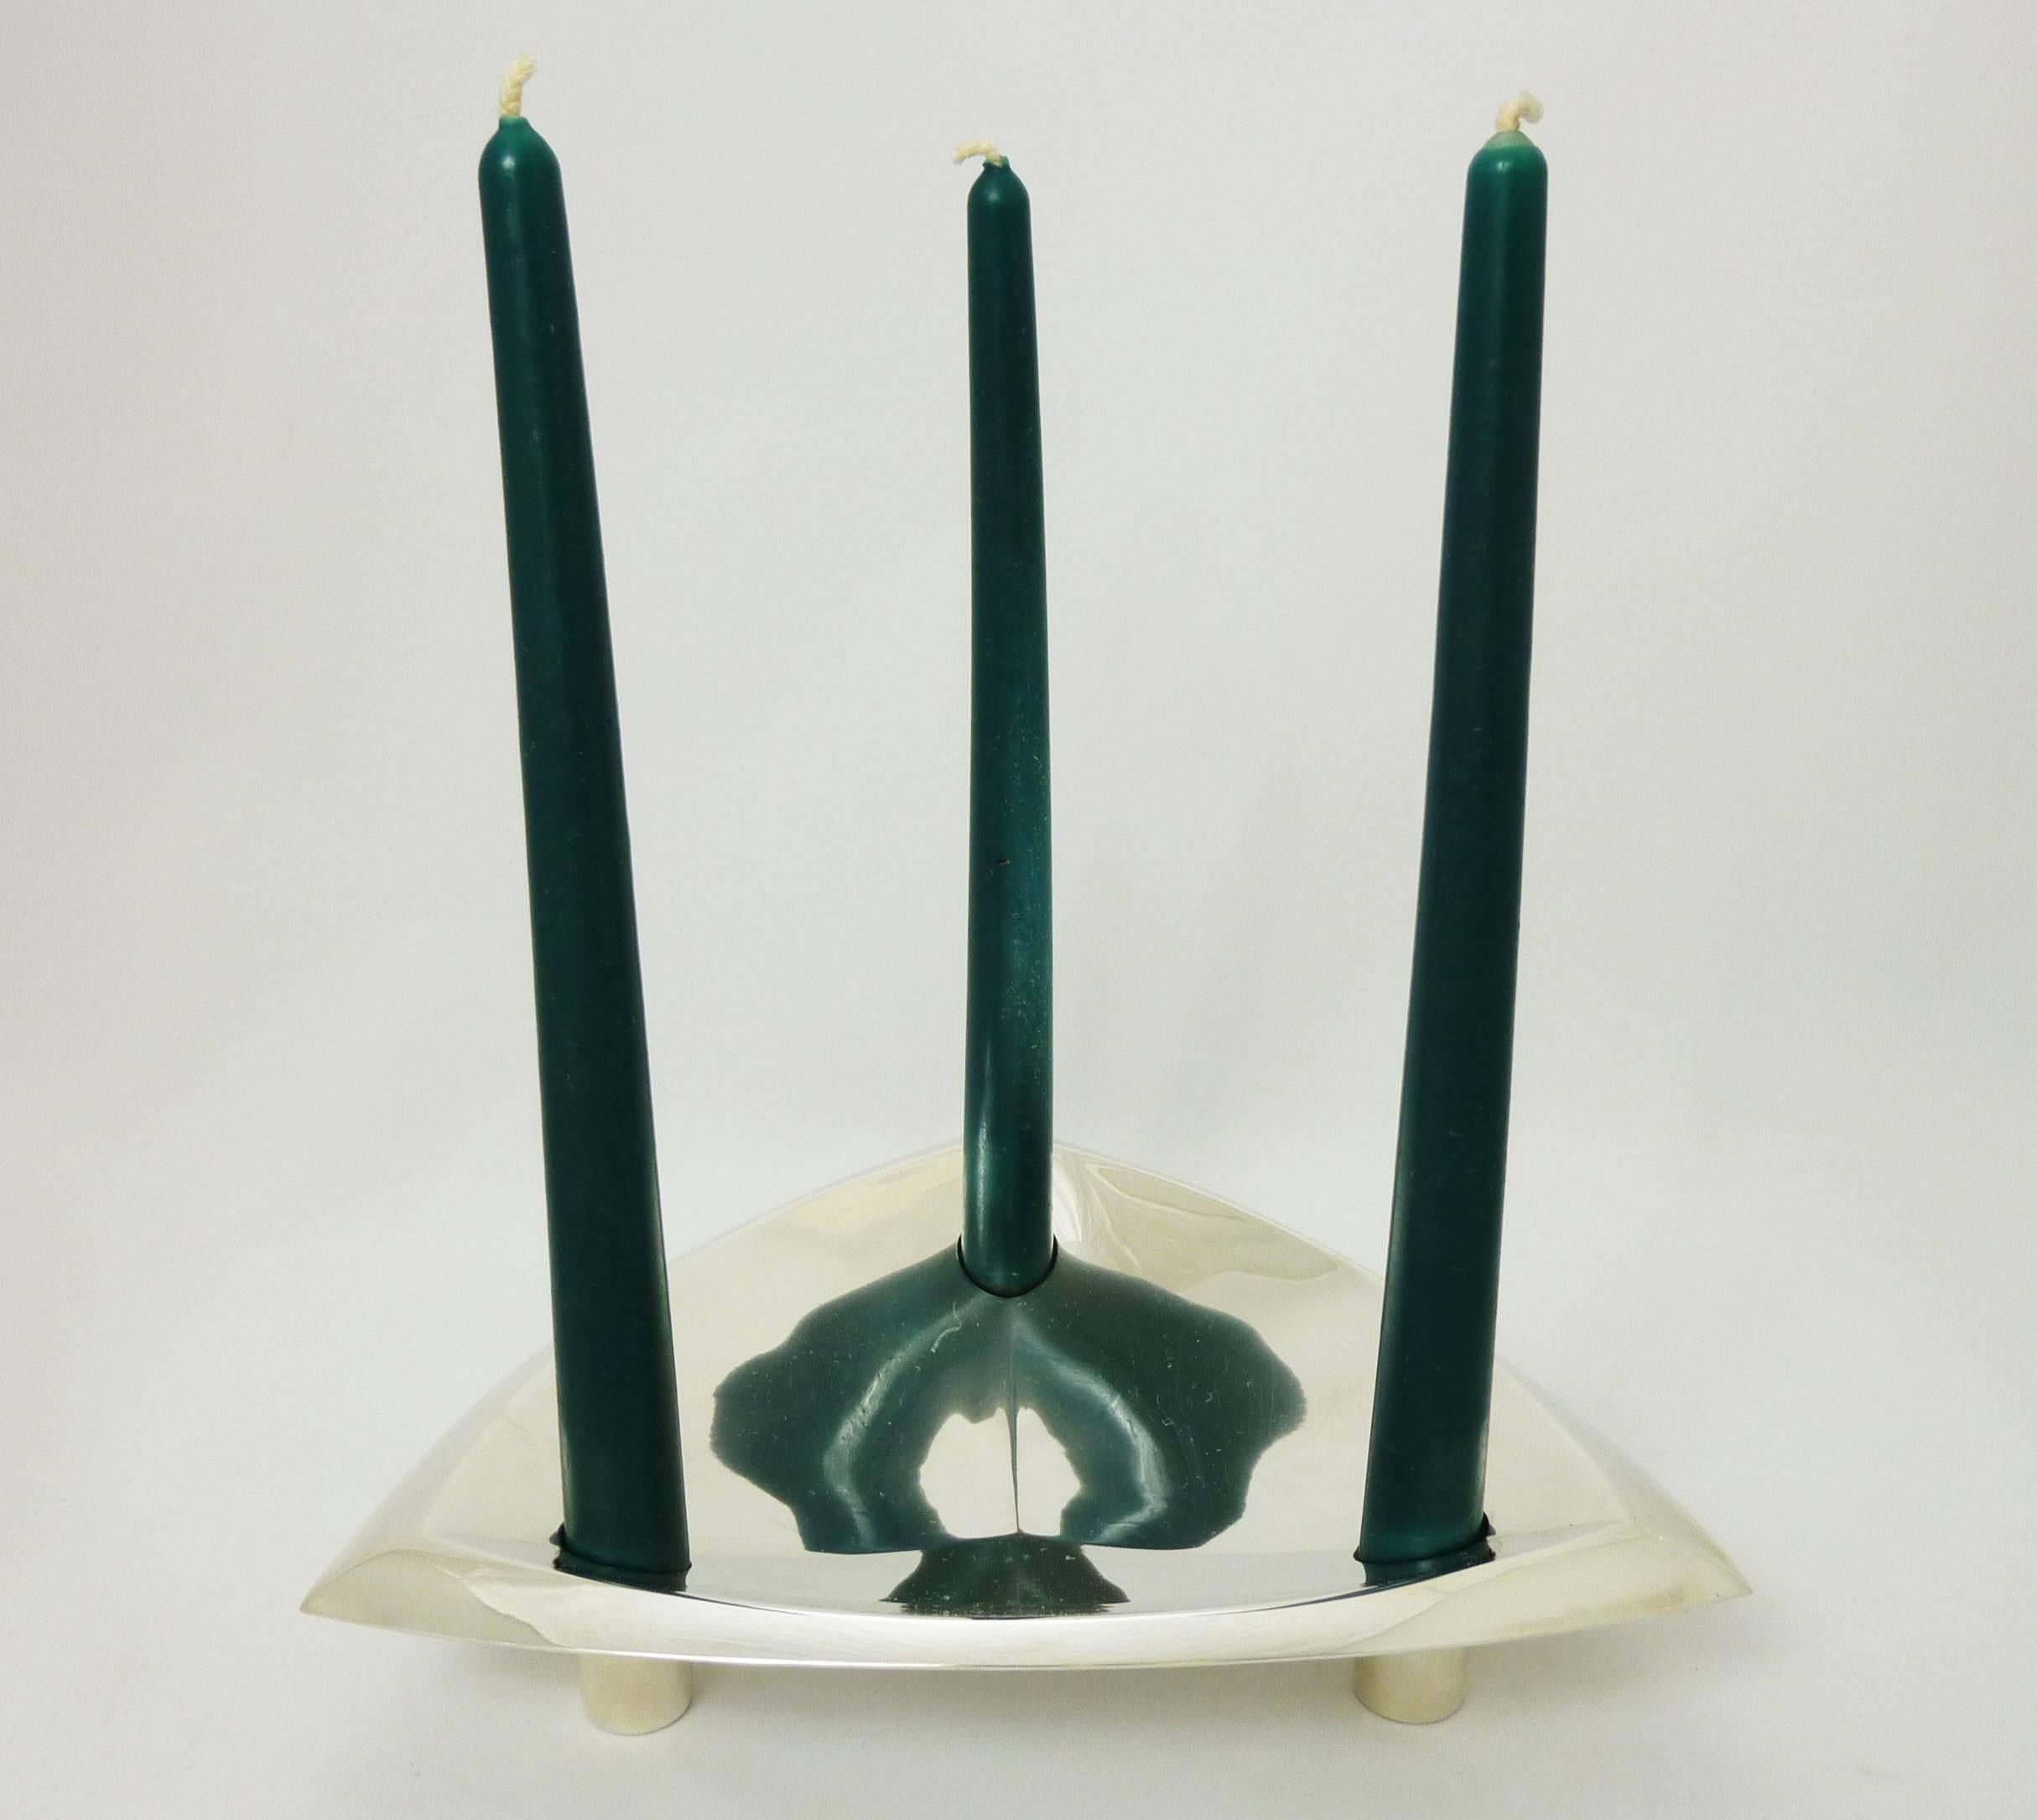 Being offered is a circa 1952 sterling silver candleholder by Tiffany & Co. of New York. Of modernist form, executed in a triangular design, made to hold three tapered candlesticks; resting on three feet. Dimensions: 9 inches diameter. Marked as